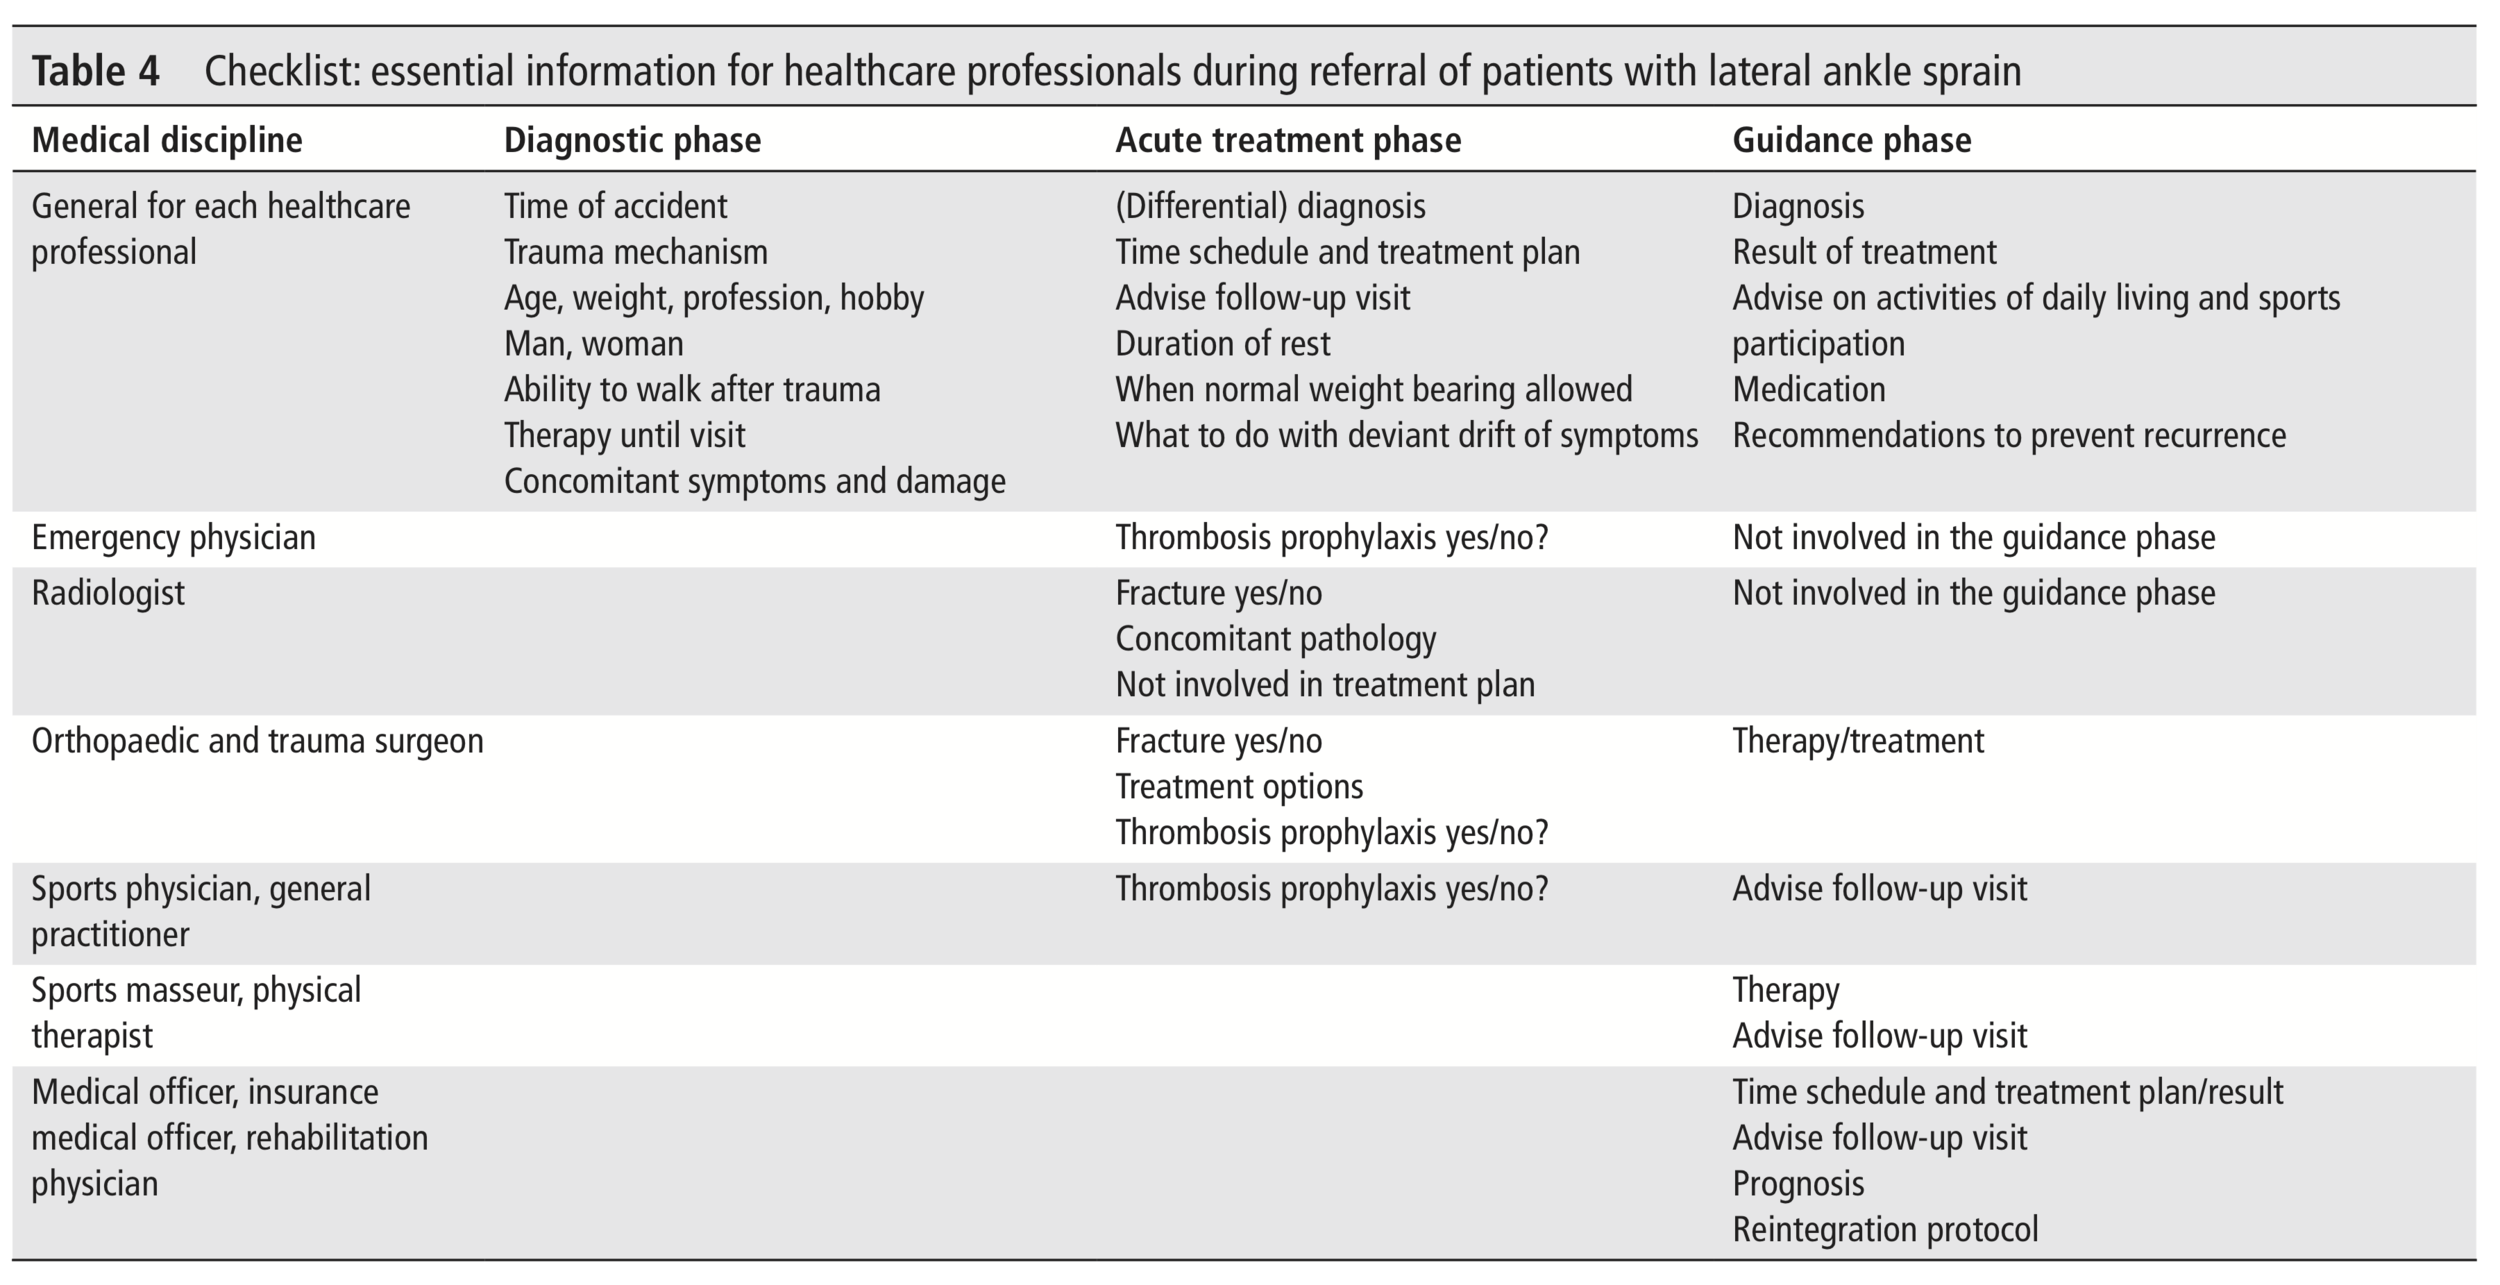 An evidence-based clinical guideline on the diagnosis, treatment